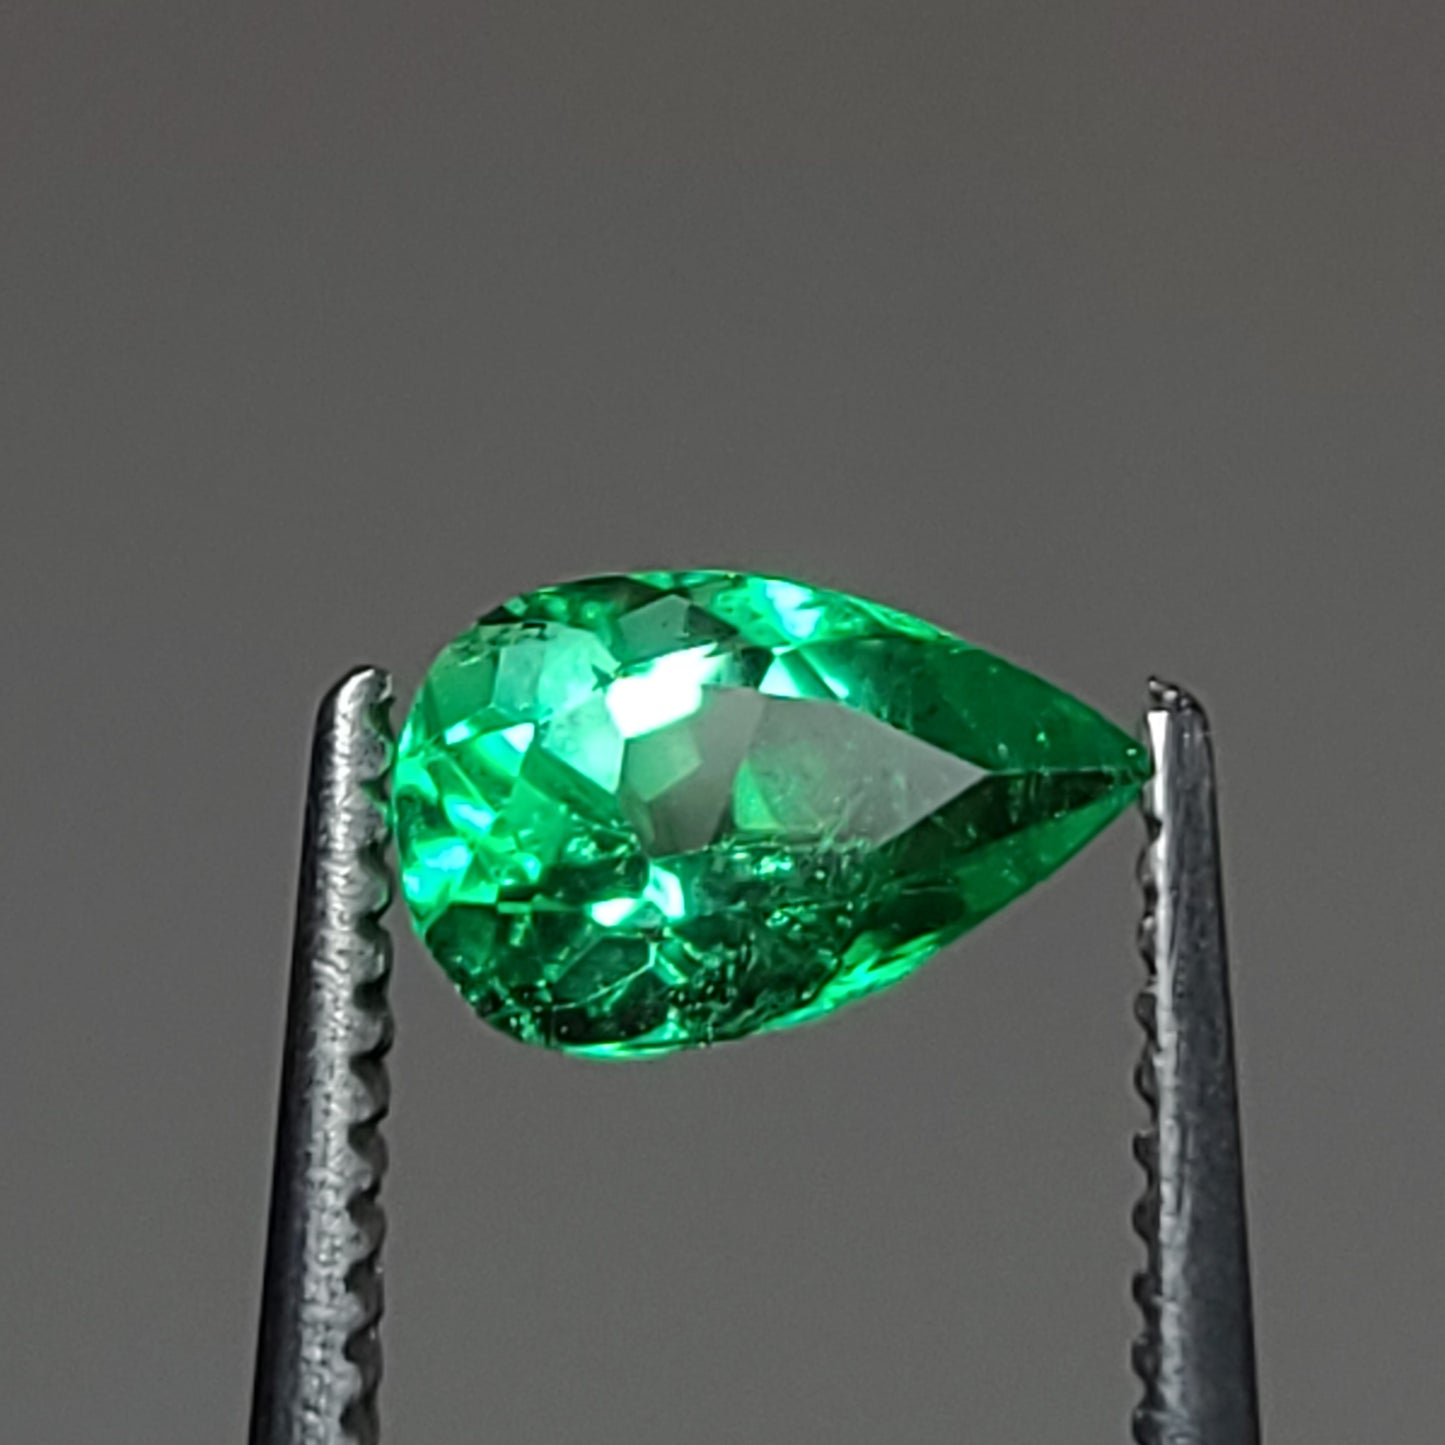 0.44 Ct Colombian Emerald | Northern Gem Supply